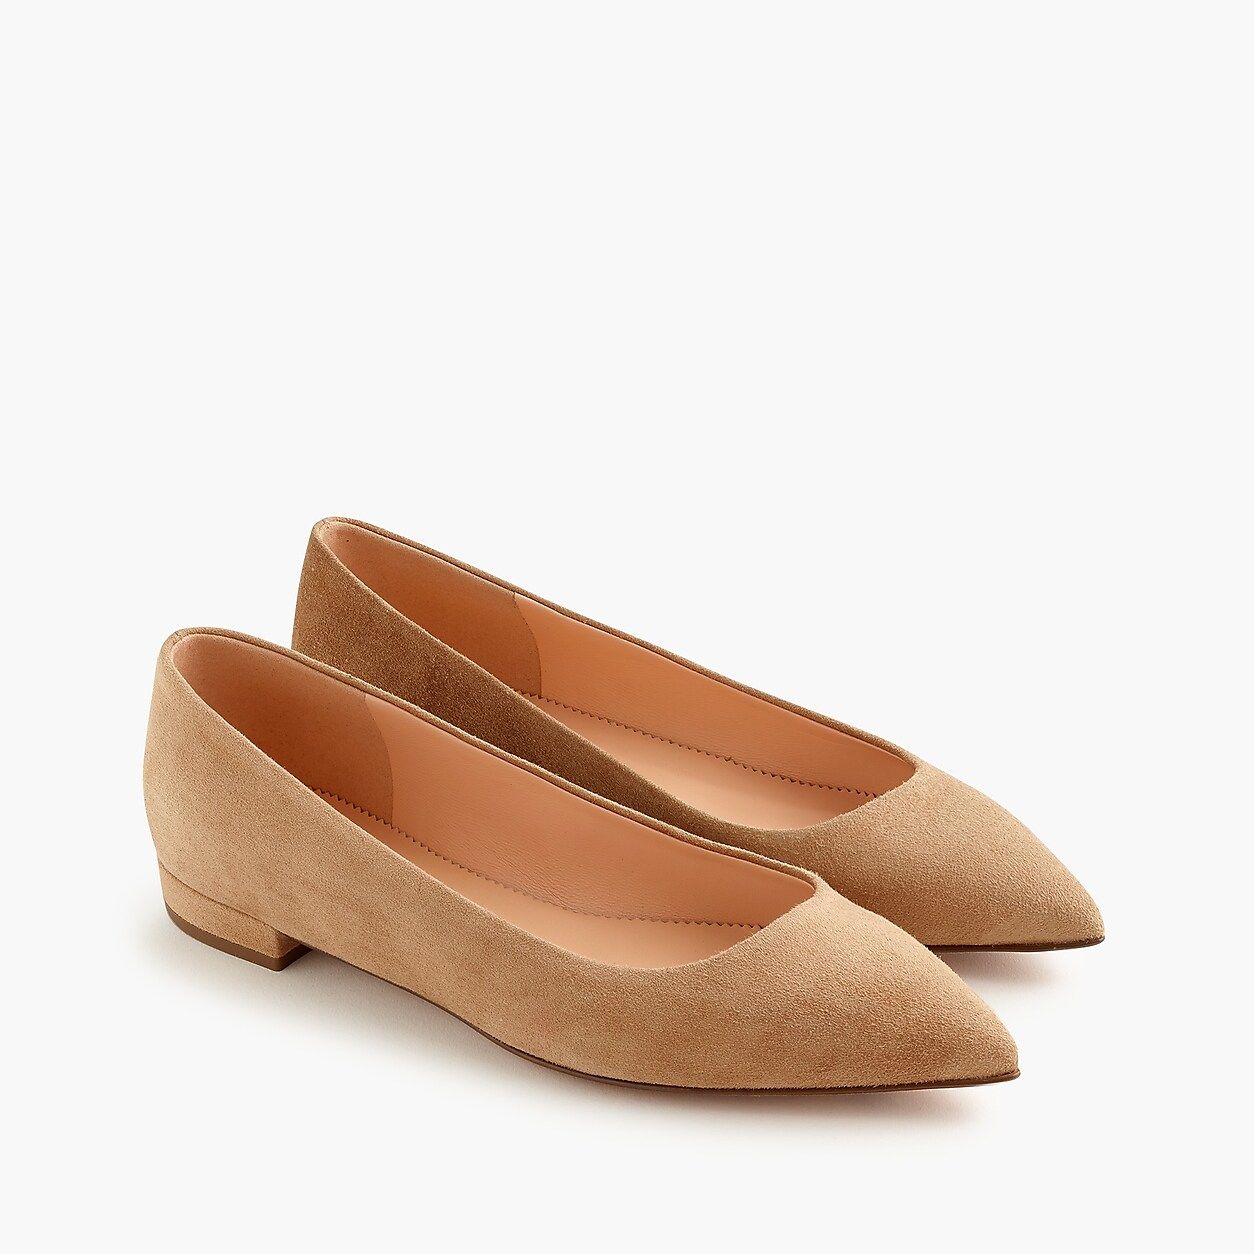 Pointed-toe flats in suede | J.Crew US